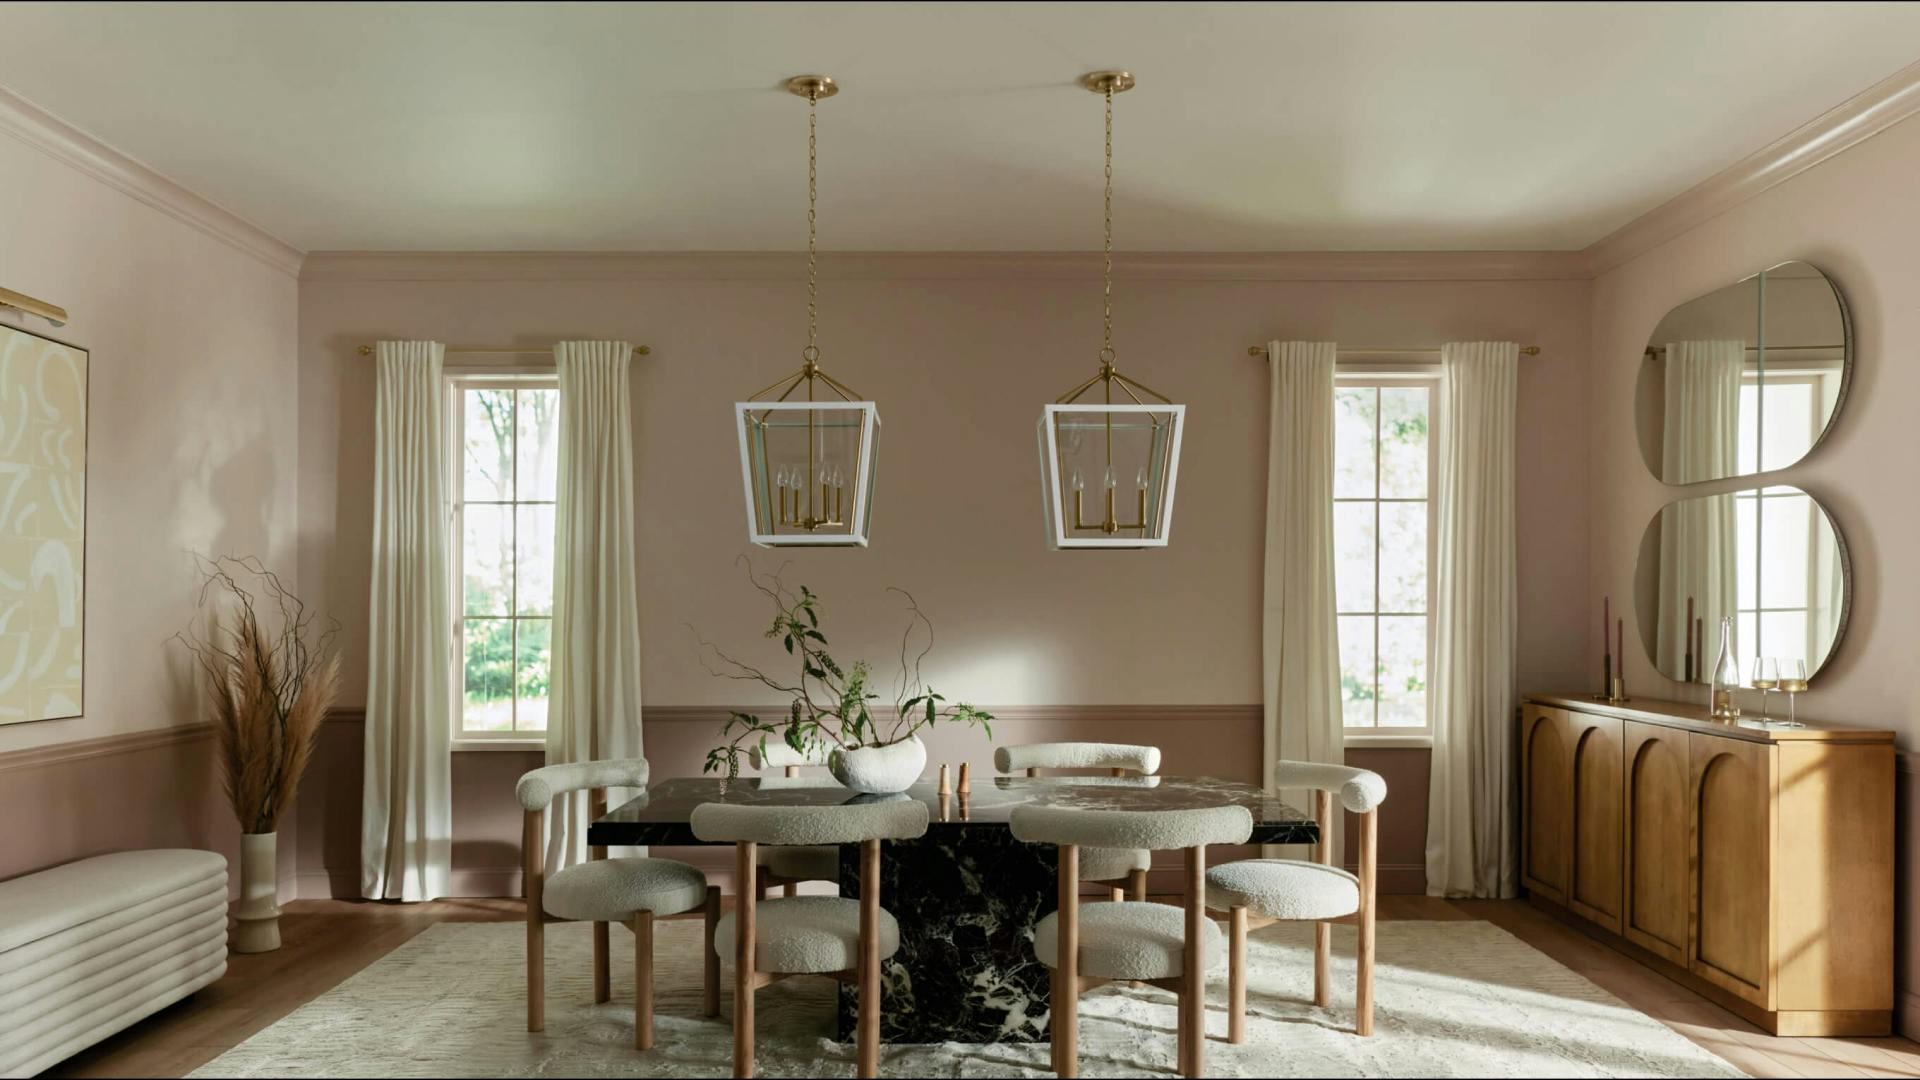 Dinning room with Delvin pendant lights, a Midi sconce, and a Radana mirror light, all turned off during the day 